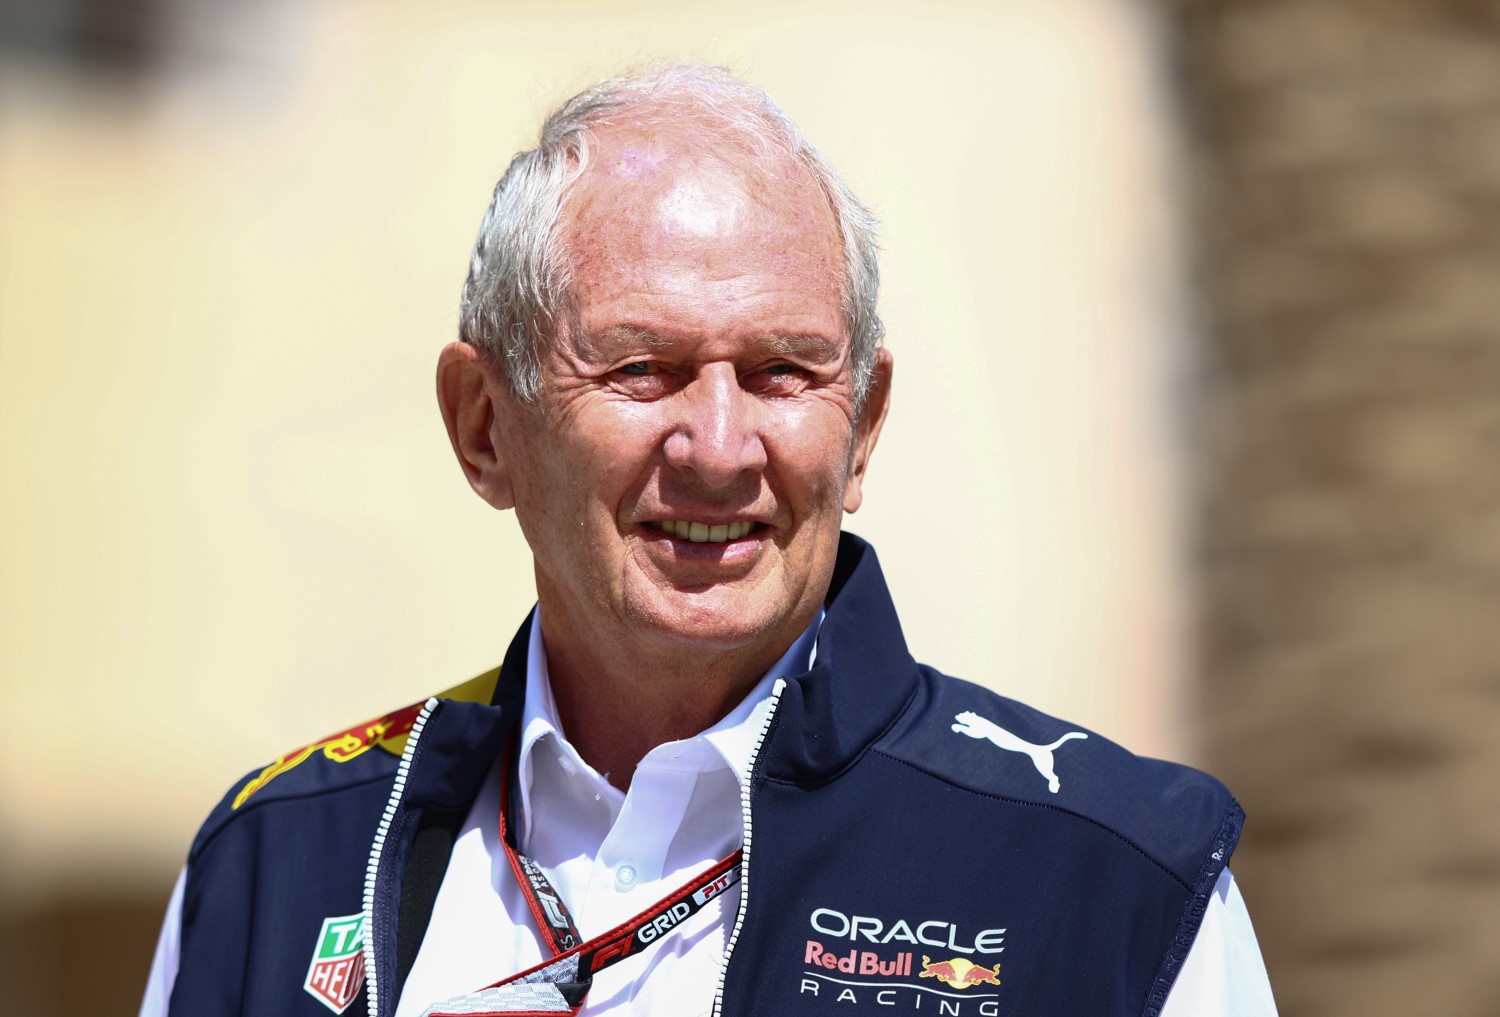 Red Bull Racing Team Consultant Dr Helmut Marko looks on in the Paddock (Photo by Mark Thompson/Getty Images)